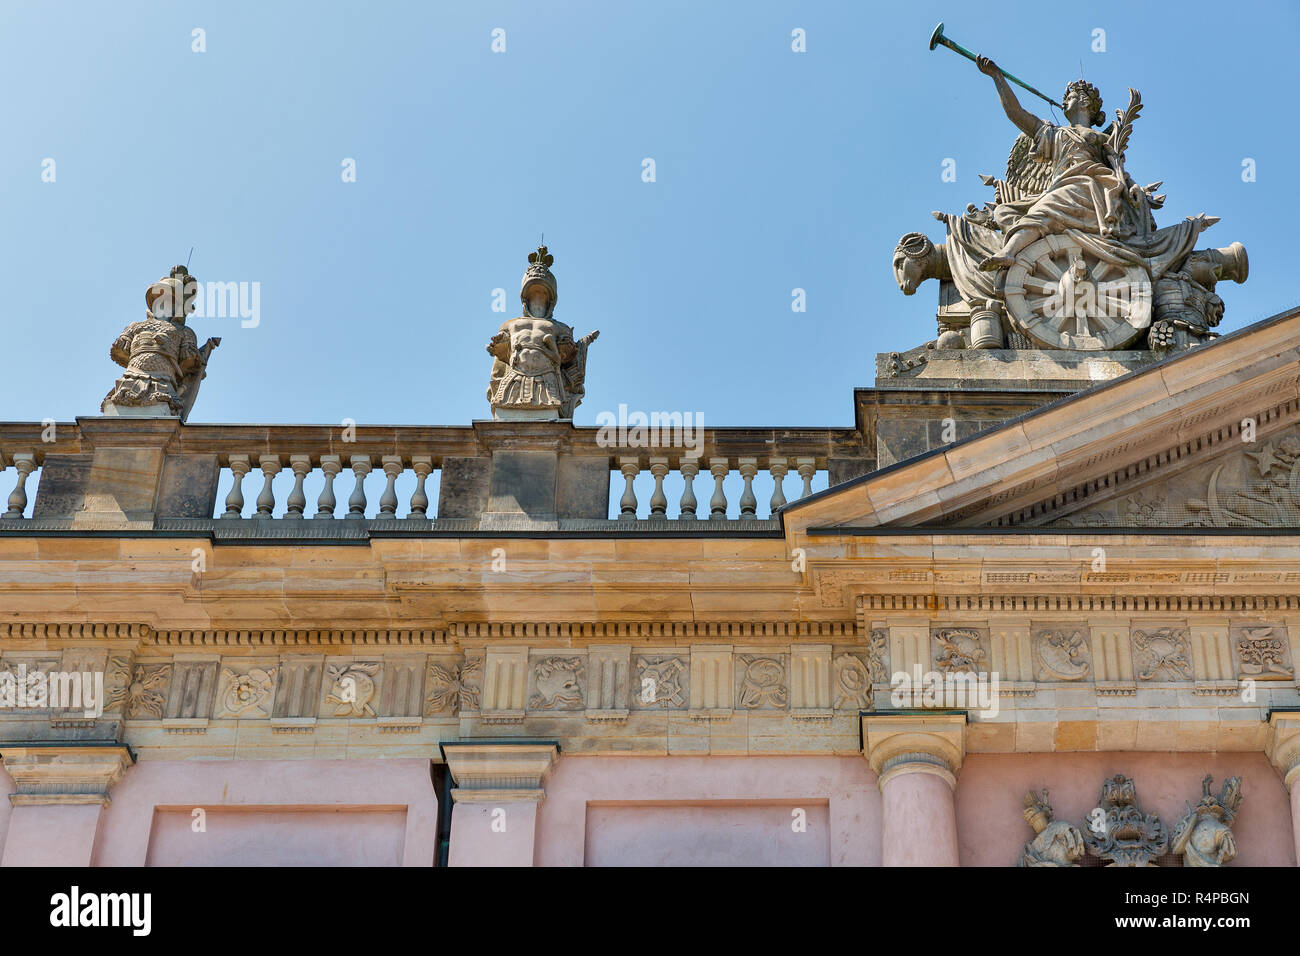 Zeughaus or Old Arsenal roof sculpture. Now it is German Historical Museum in Berlin, Germany. Stock Photo